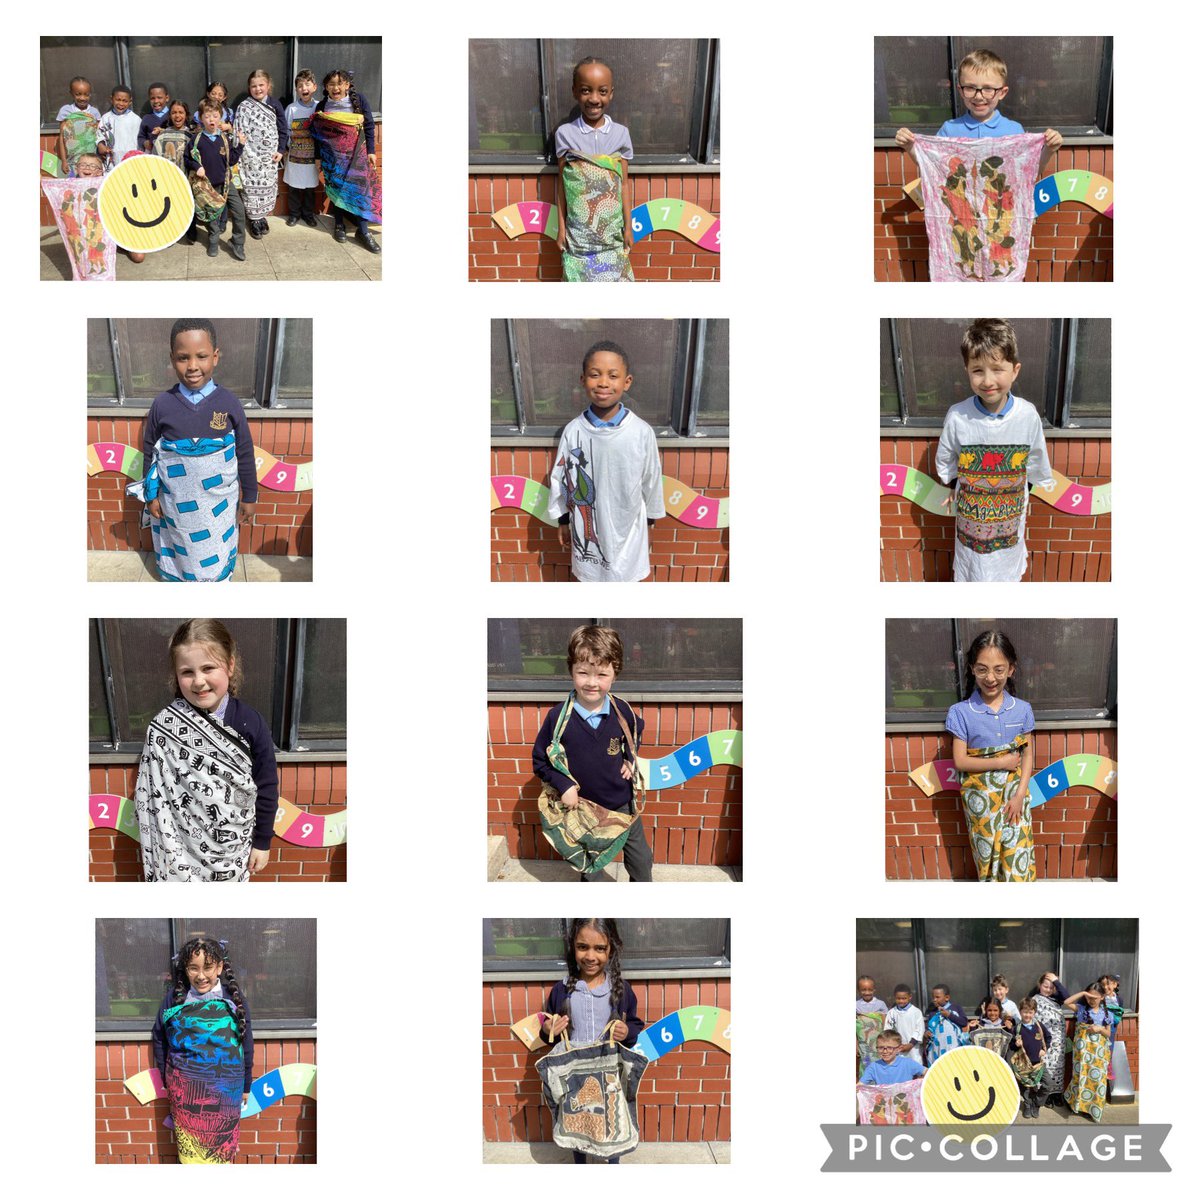 Year 2 are enjoying their art topic this term - African prints and patterns. They have looked at some fabrics that Mrs Rabbette has and even tried wearing them! Today they used techniques with colours, shapes and patterns, to design school uniform items @StSebastiansPri #SebsArt